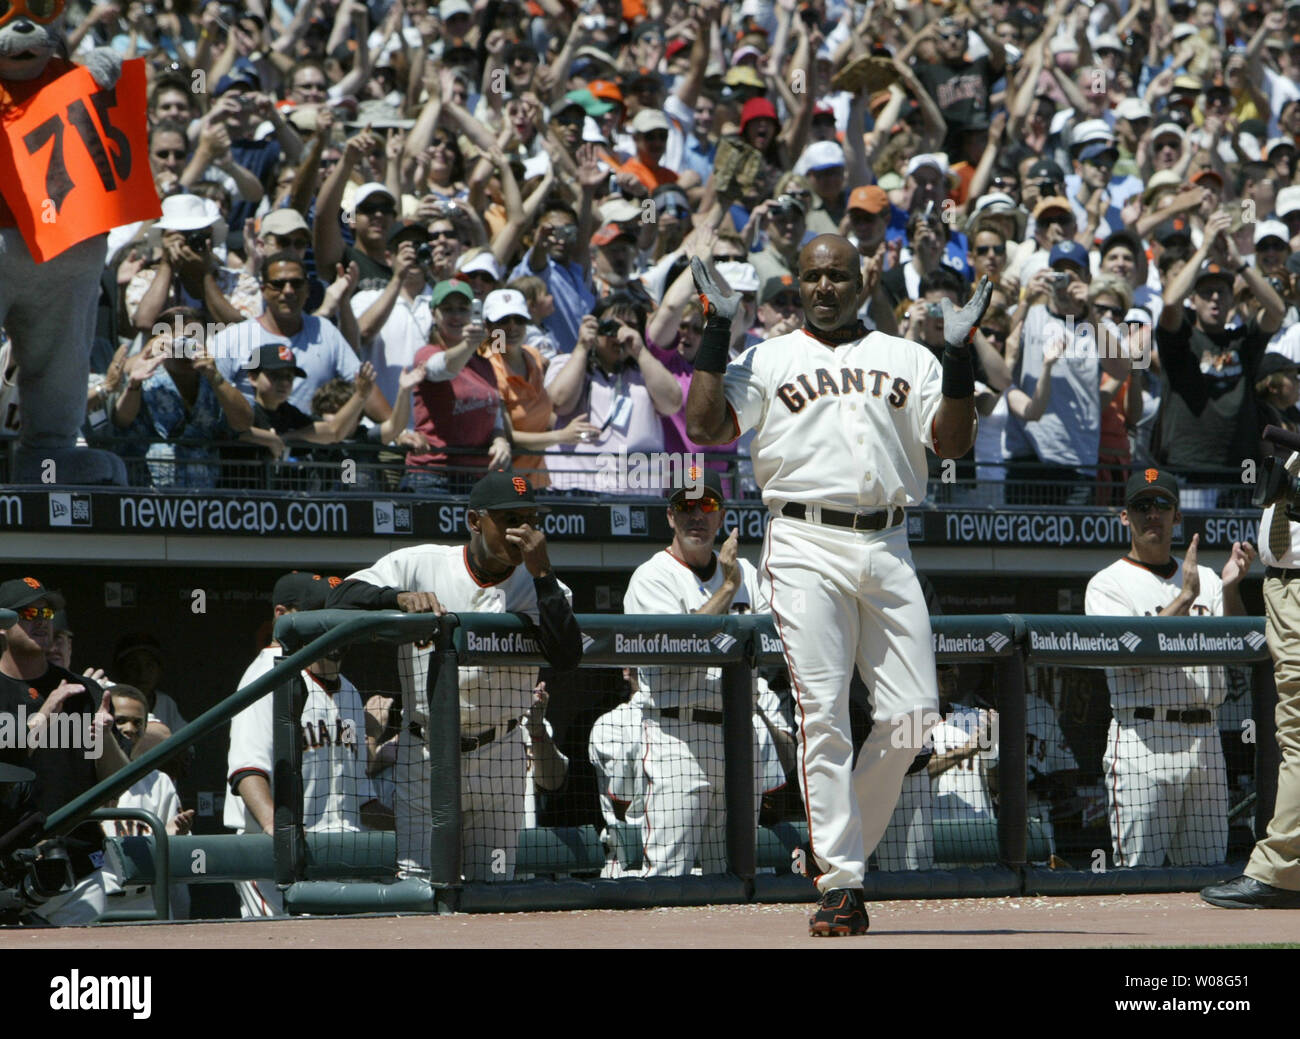 San Francisco Giants Barry Bonds makes a curtain call after hitting career home run number 715 off the Colorado Rockies pitcher Byung-Hyun Kim at AT&T Park in San Francisco on May 28, 2006. Bonds has passed Babe Ruth to be second only to Hank Aaron.  (UPI Photo/Bruce Gordon) Stock Photo